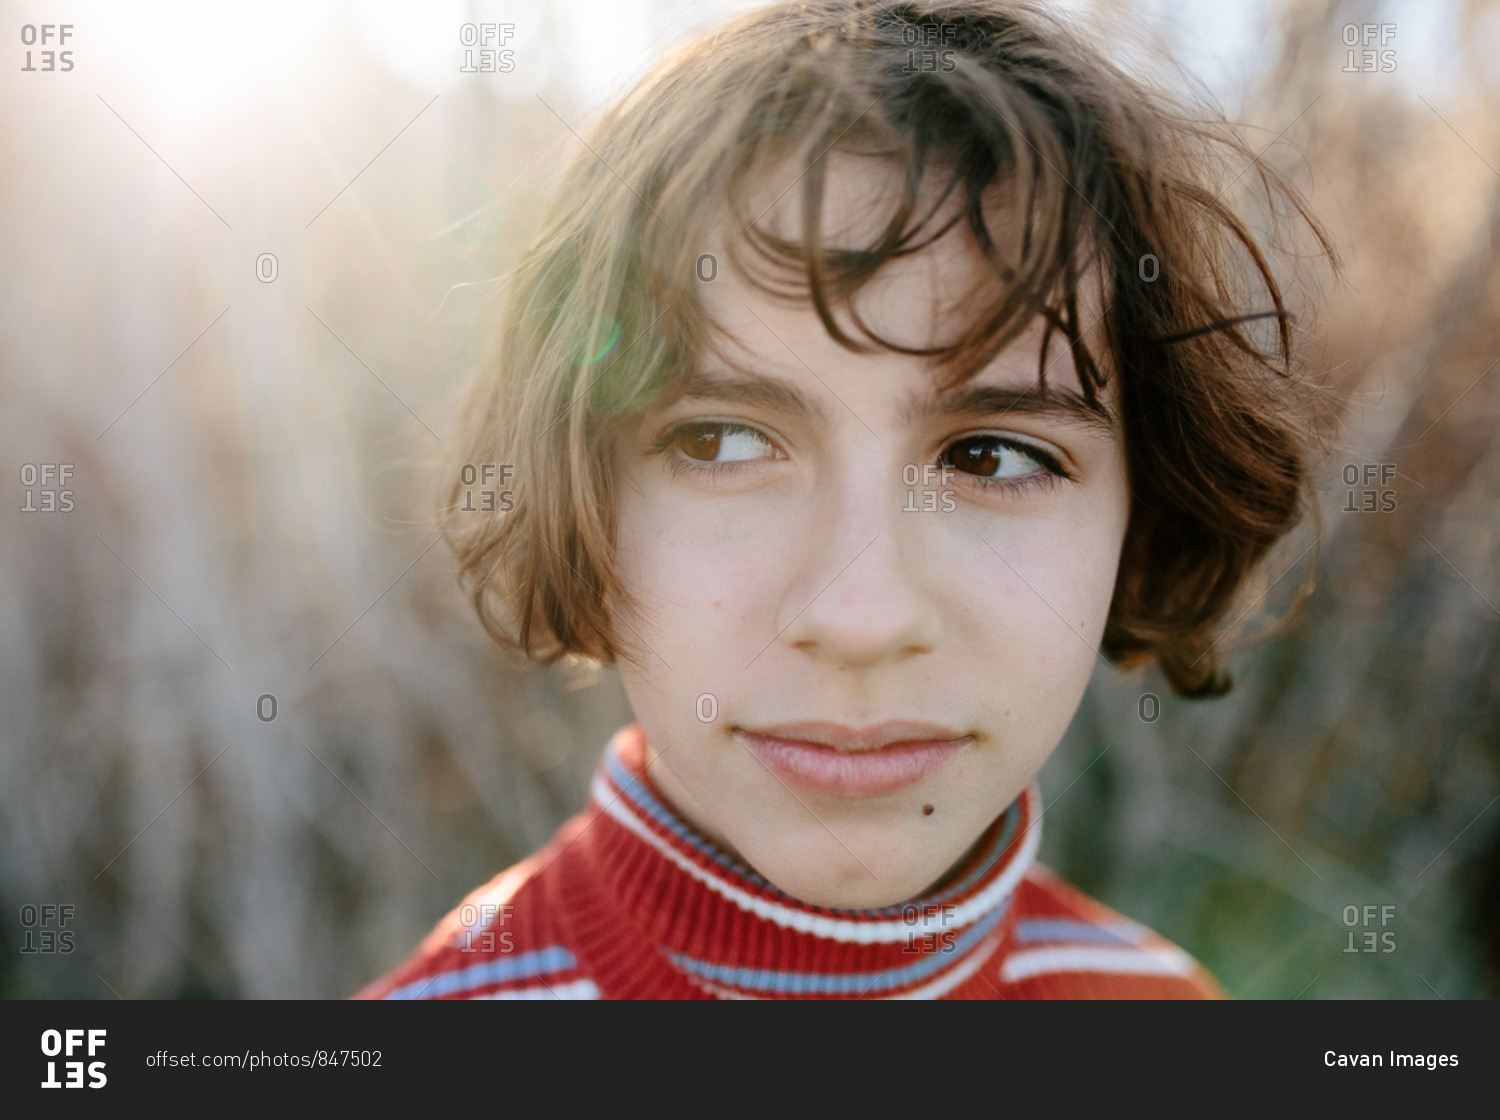 Closeup portrait of a young teen girl with a sideways glance